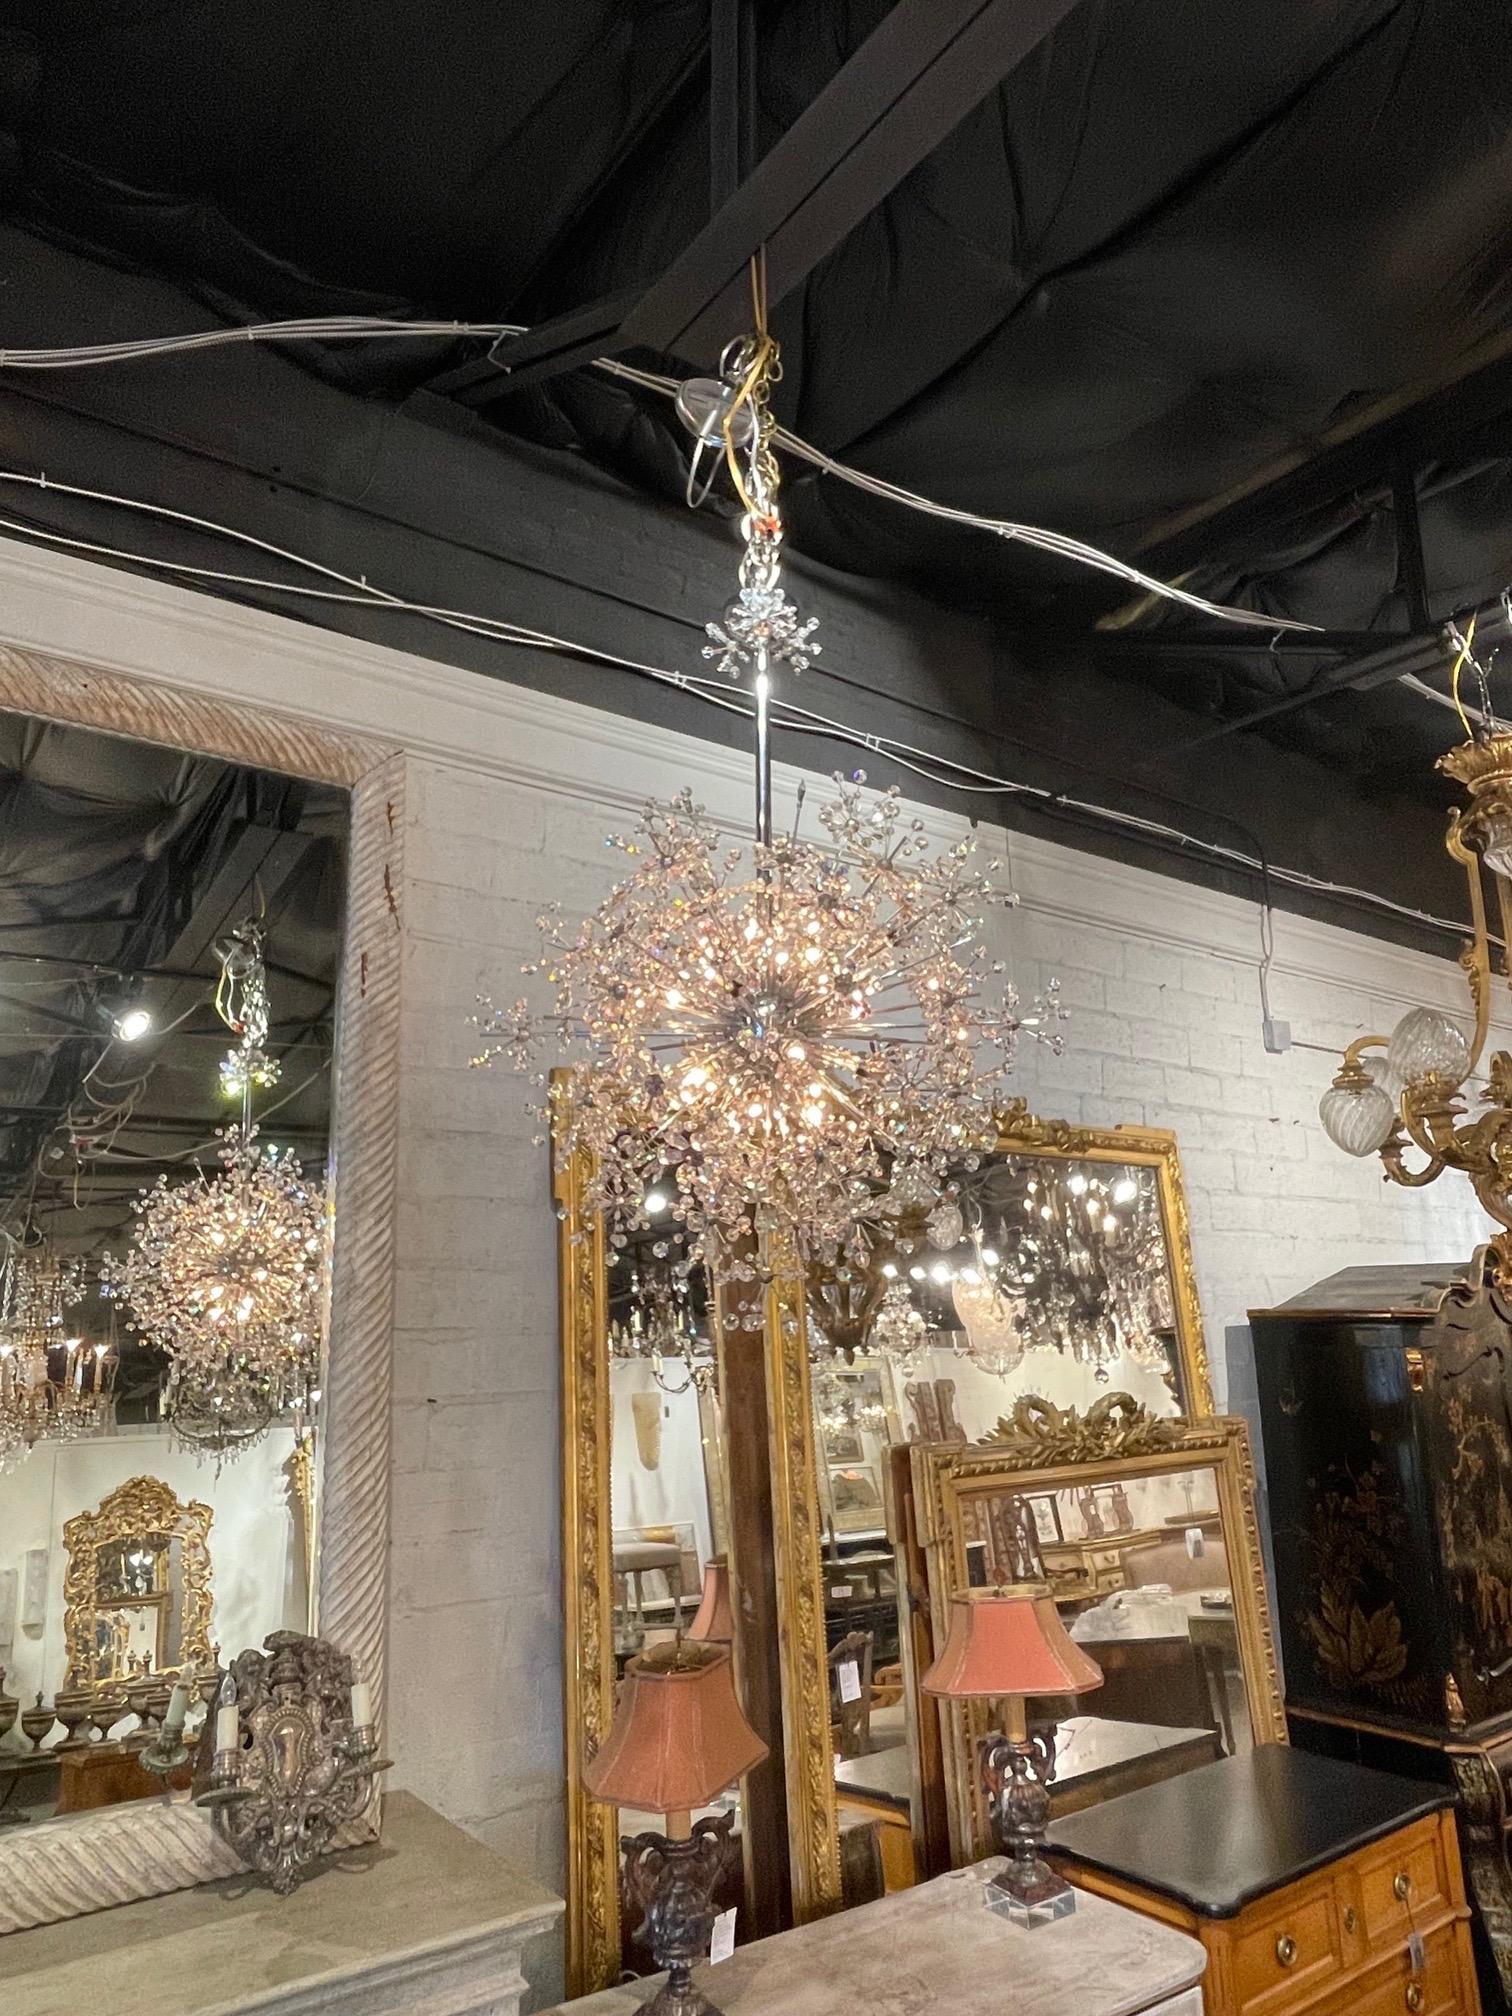 Stunning vintage Italian sputnik crystal chandelier on a chrome frame. The piece is covered in a multitude of glistening crystals including some in the shape of a flower. Creates a fun retro vibe. So pretty!